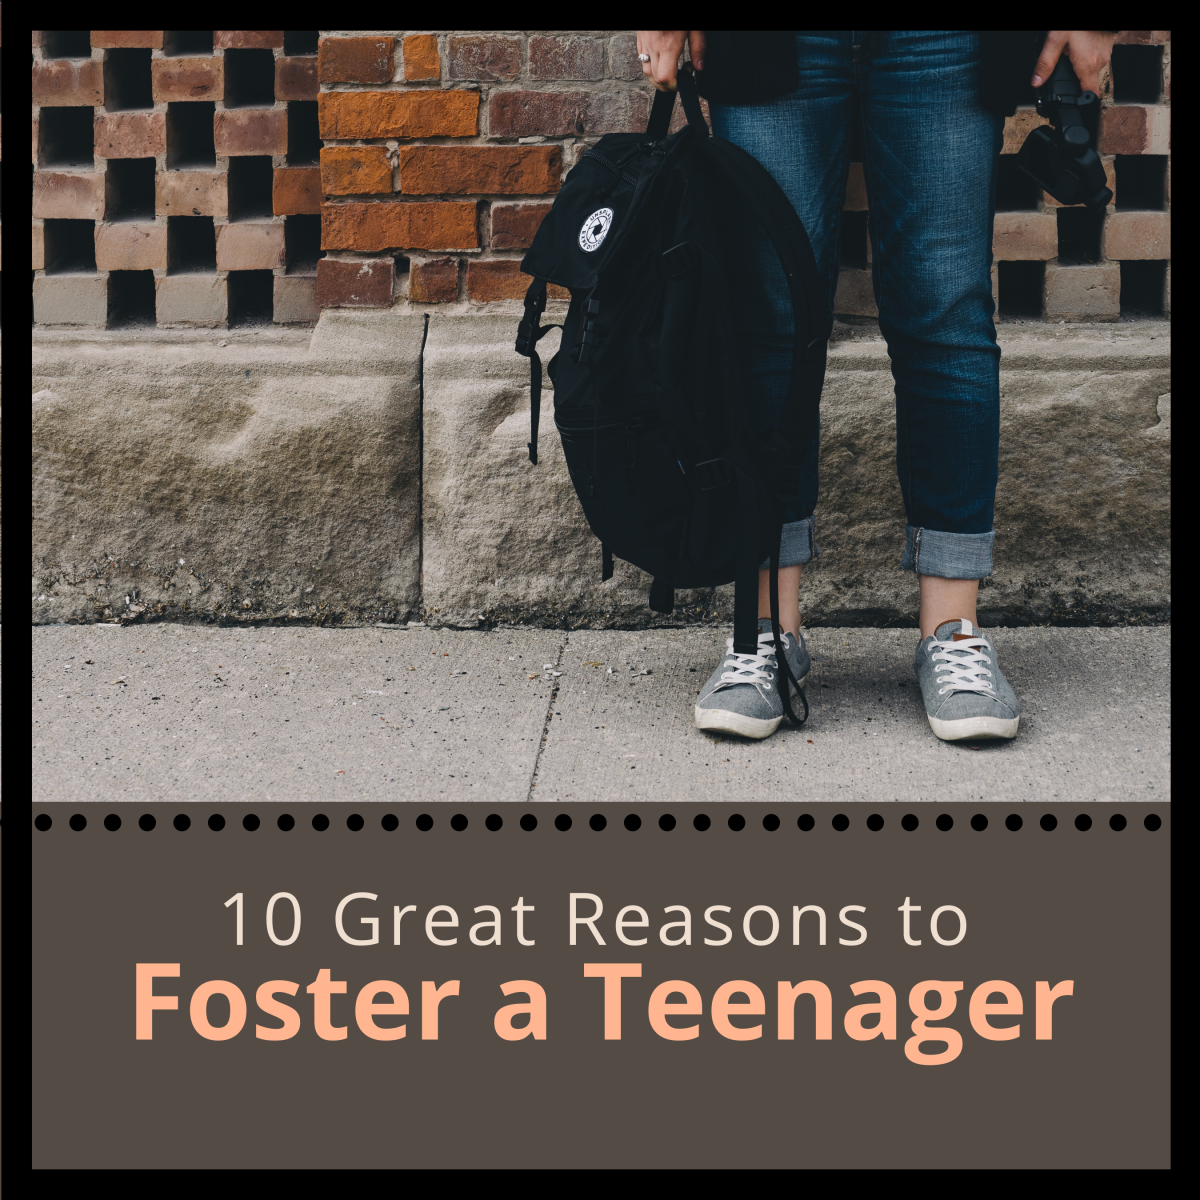 The pros and cons of fostering a teenager. 